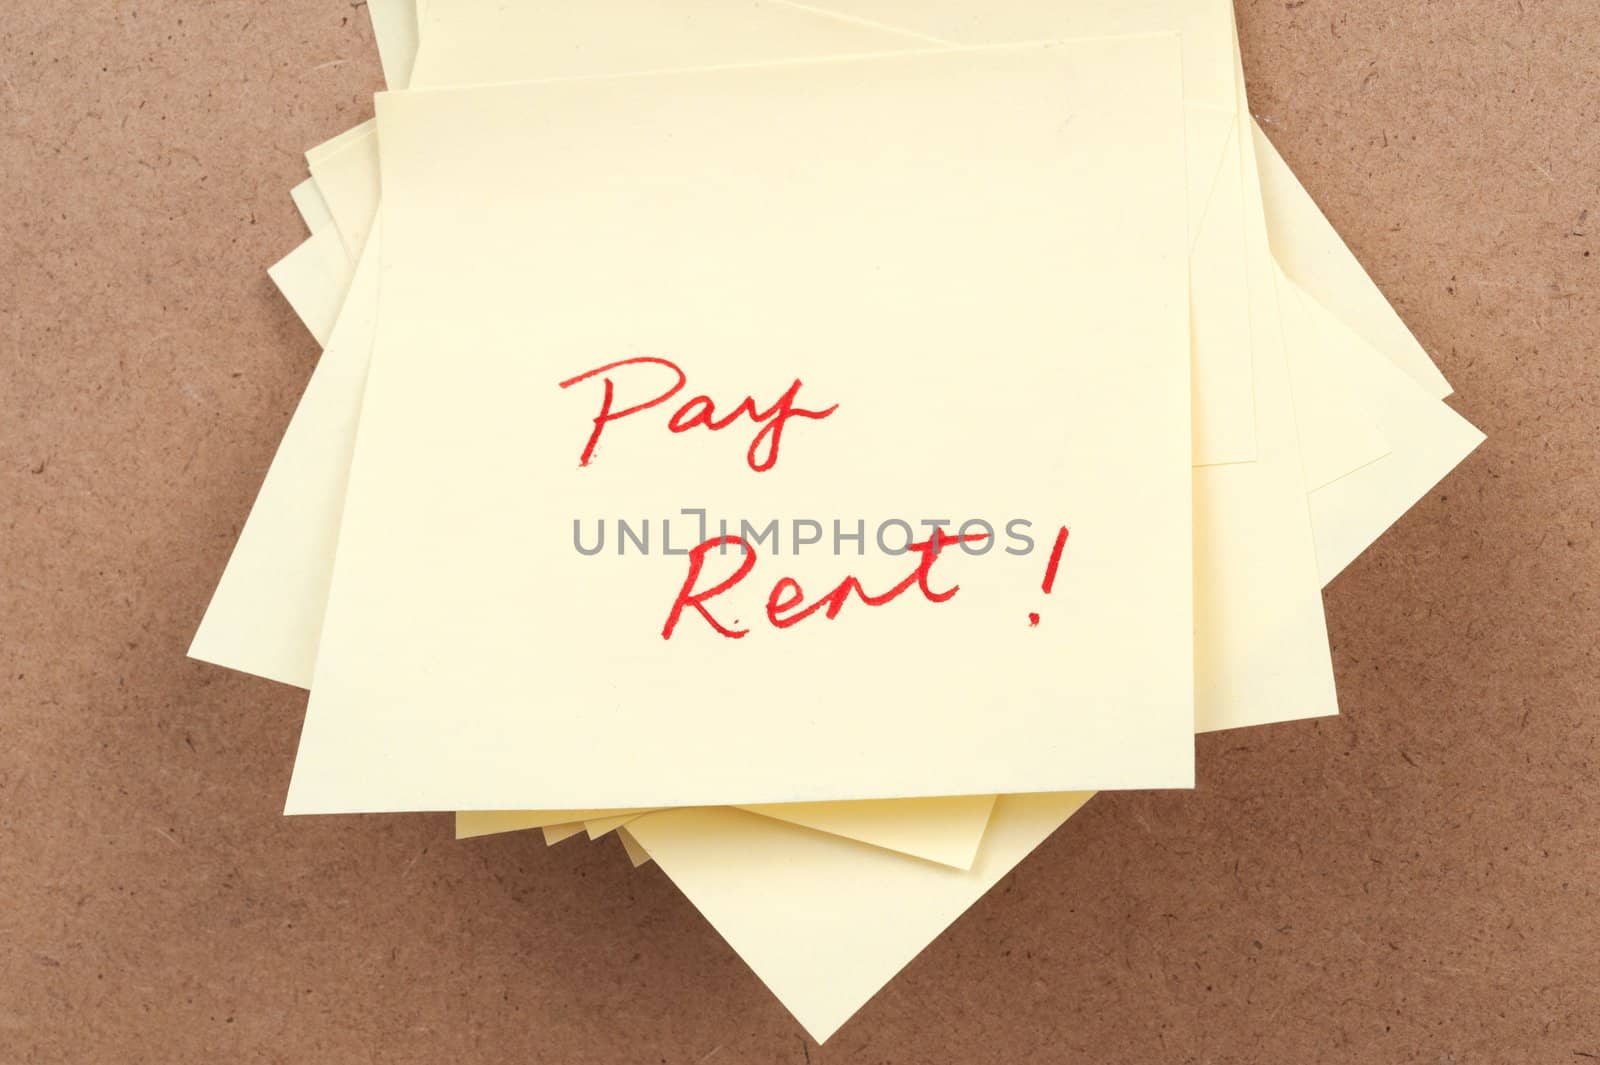 Pay rent words written on sticky note